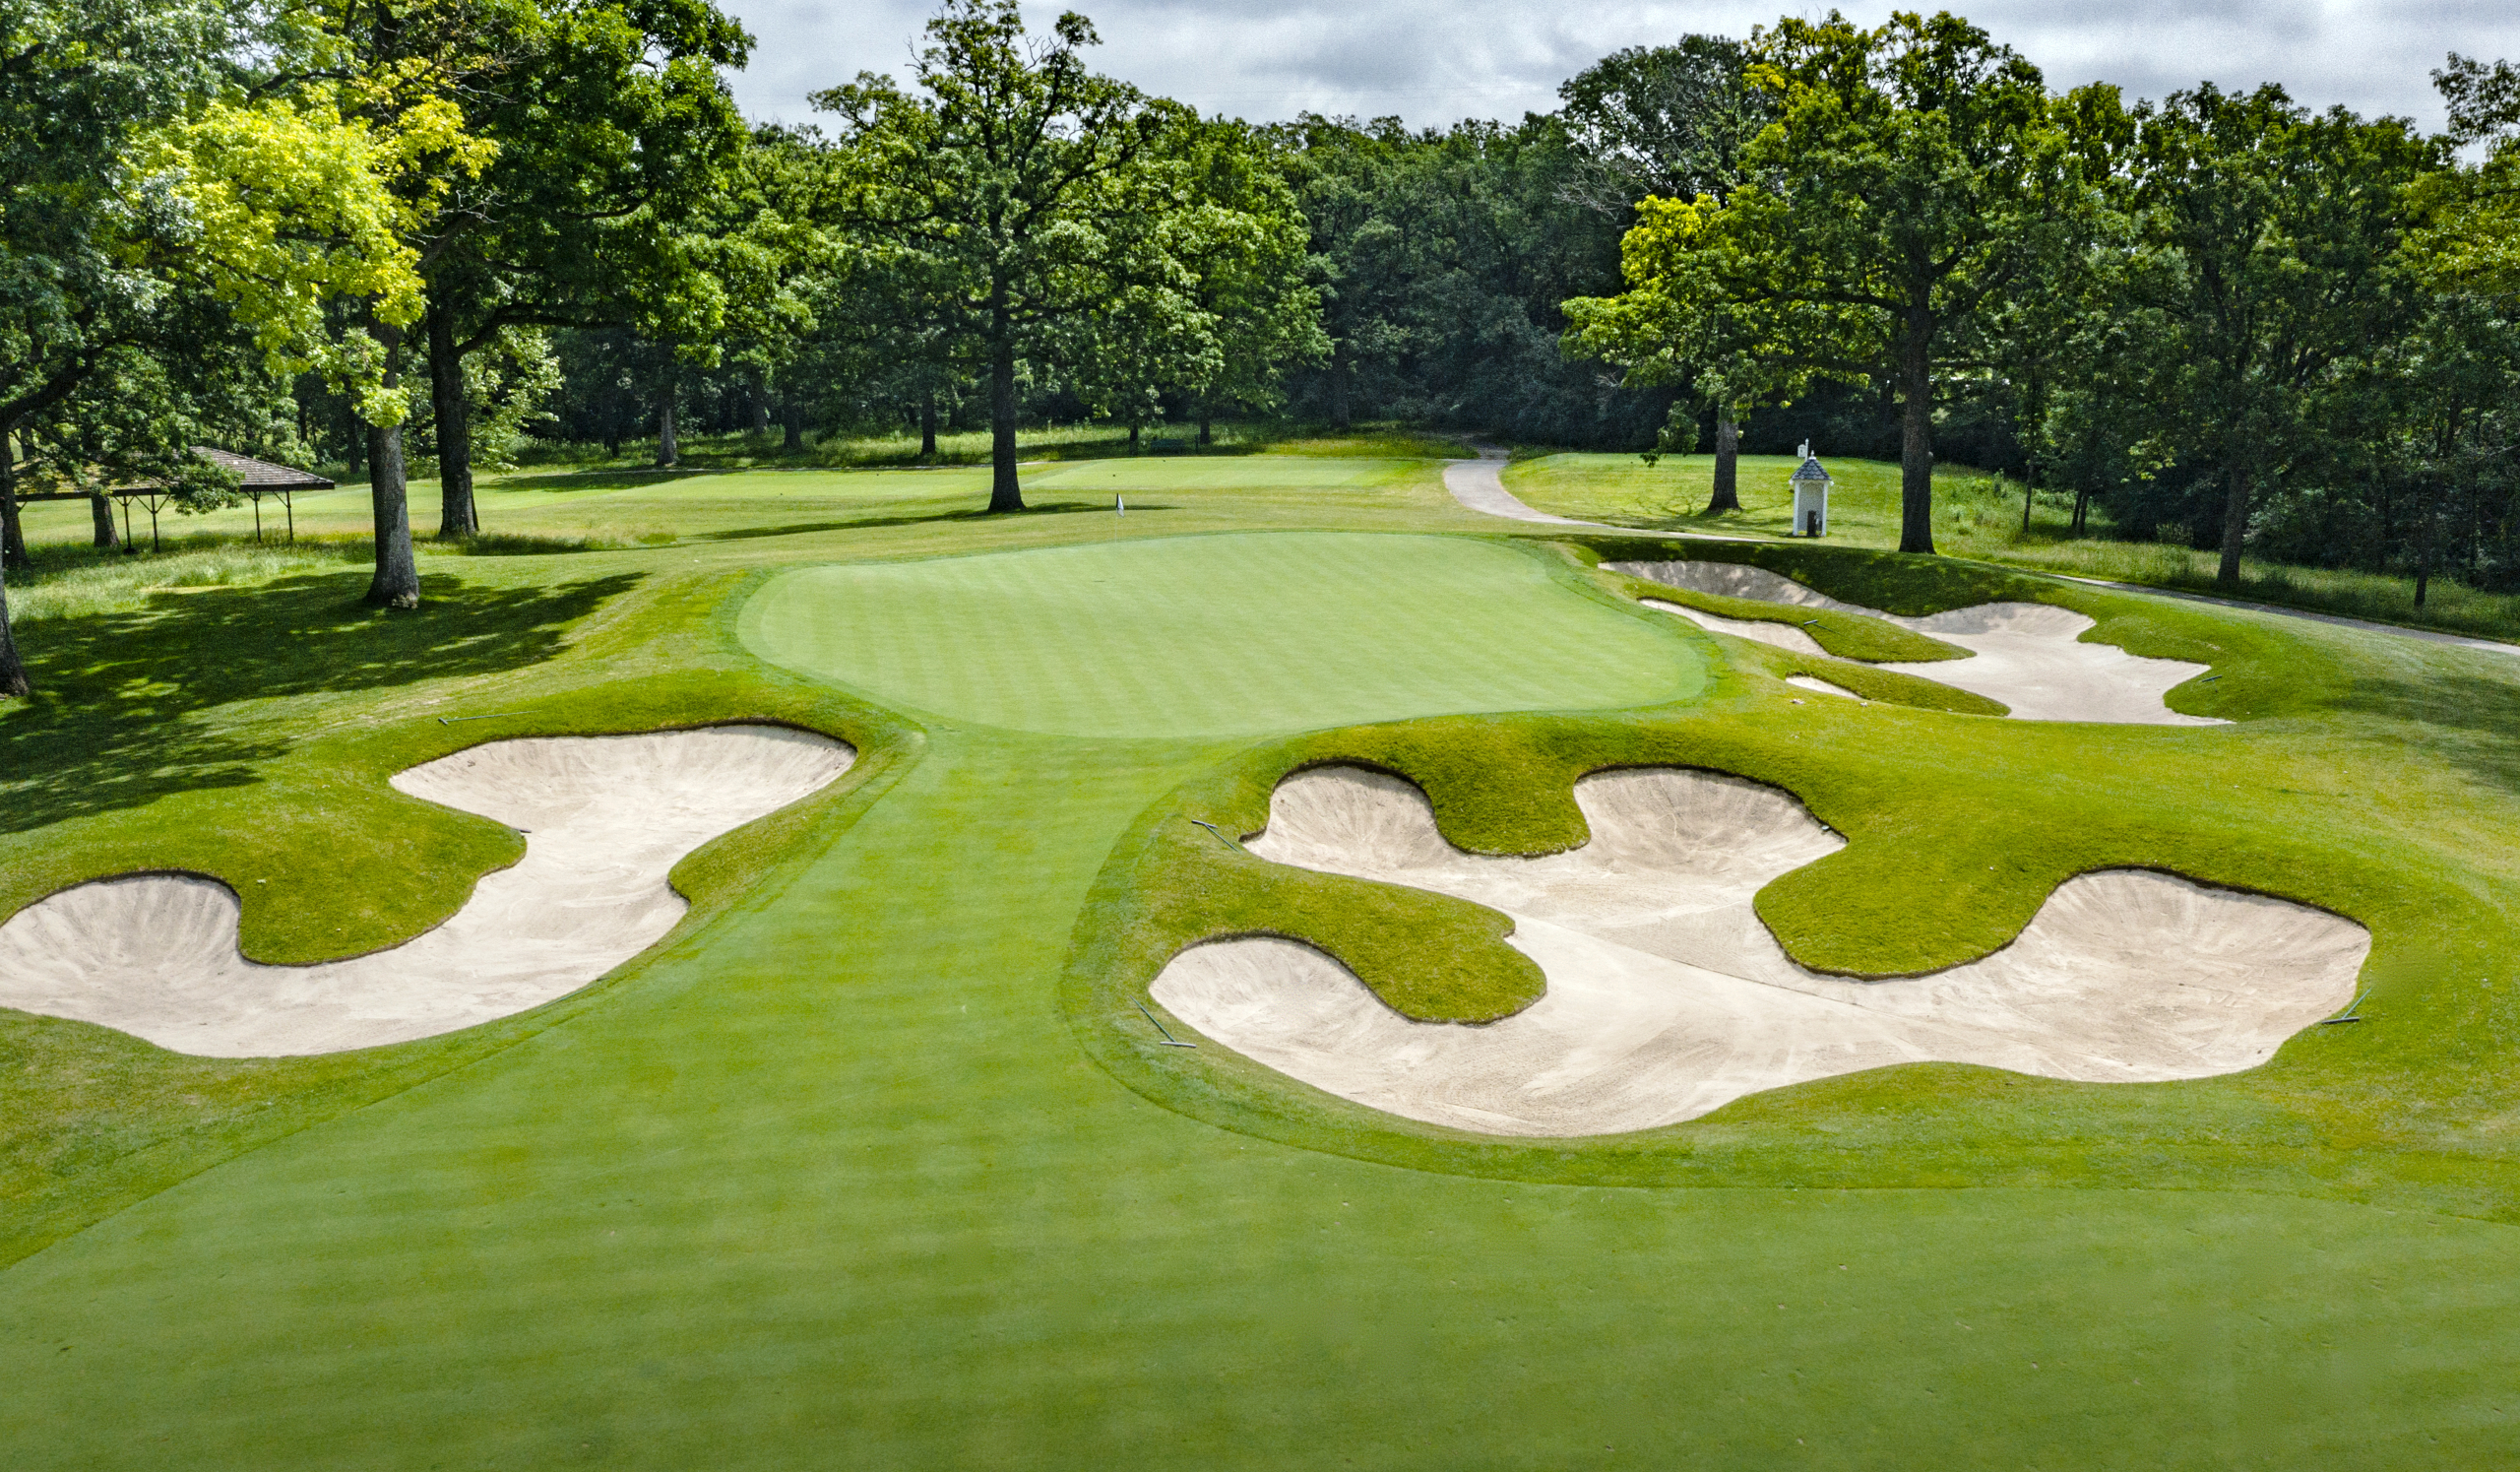 Pictures of Cog Hill GC June 18, 2019
©Photography by Charles Cherney